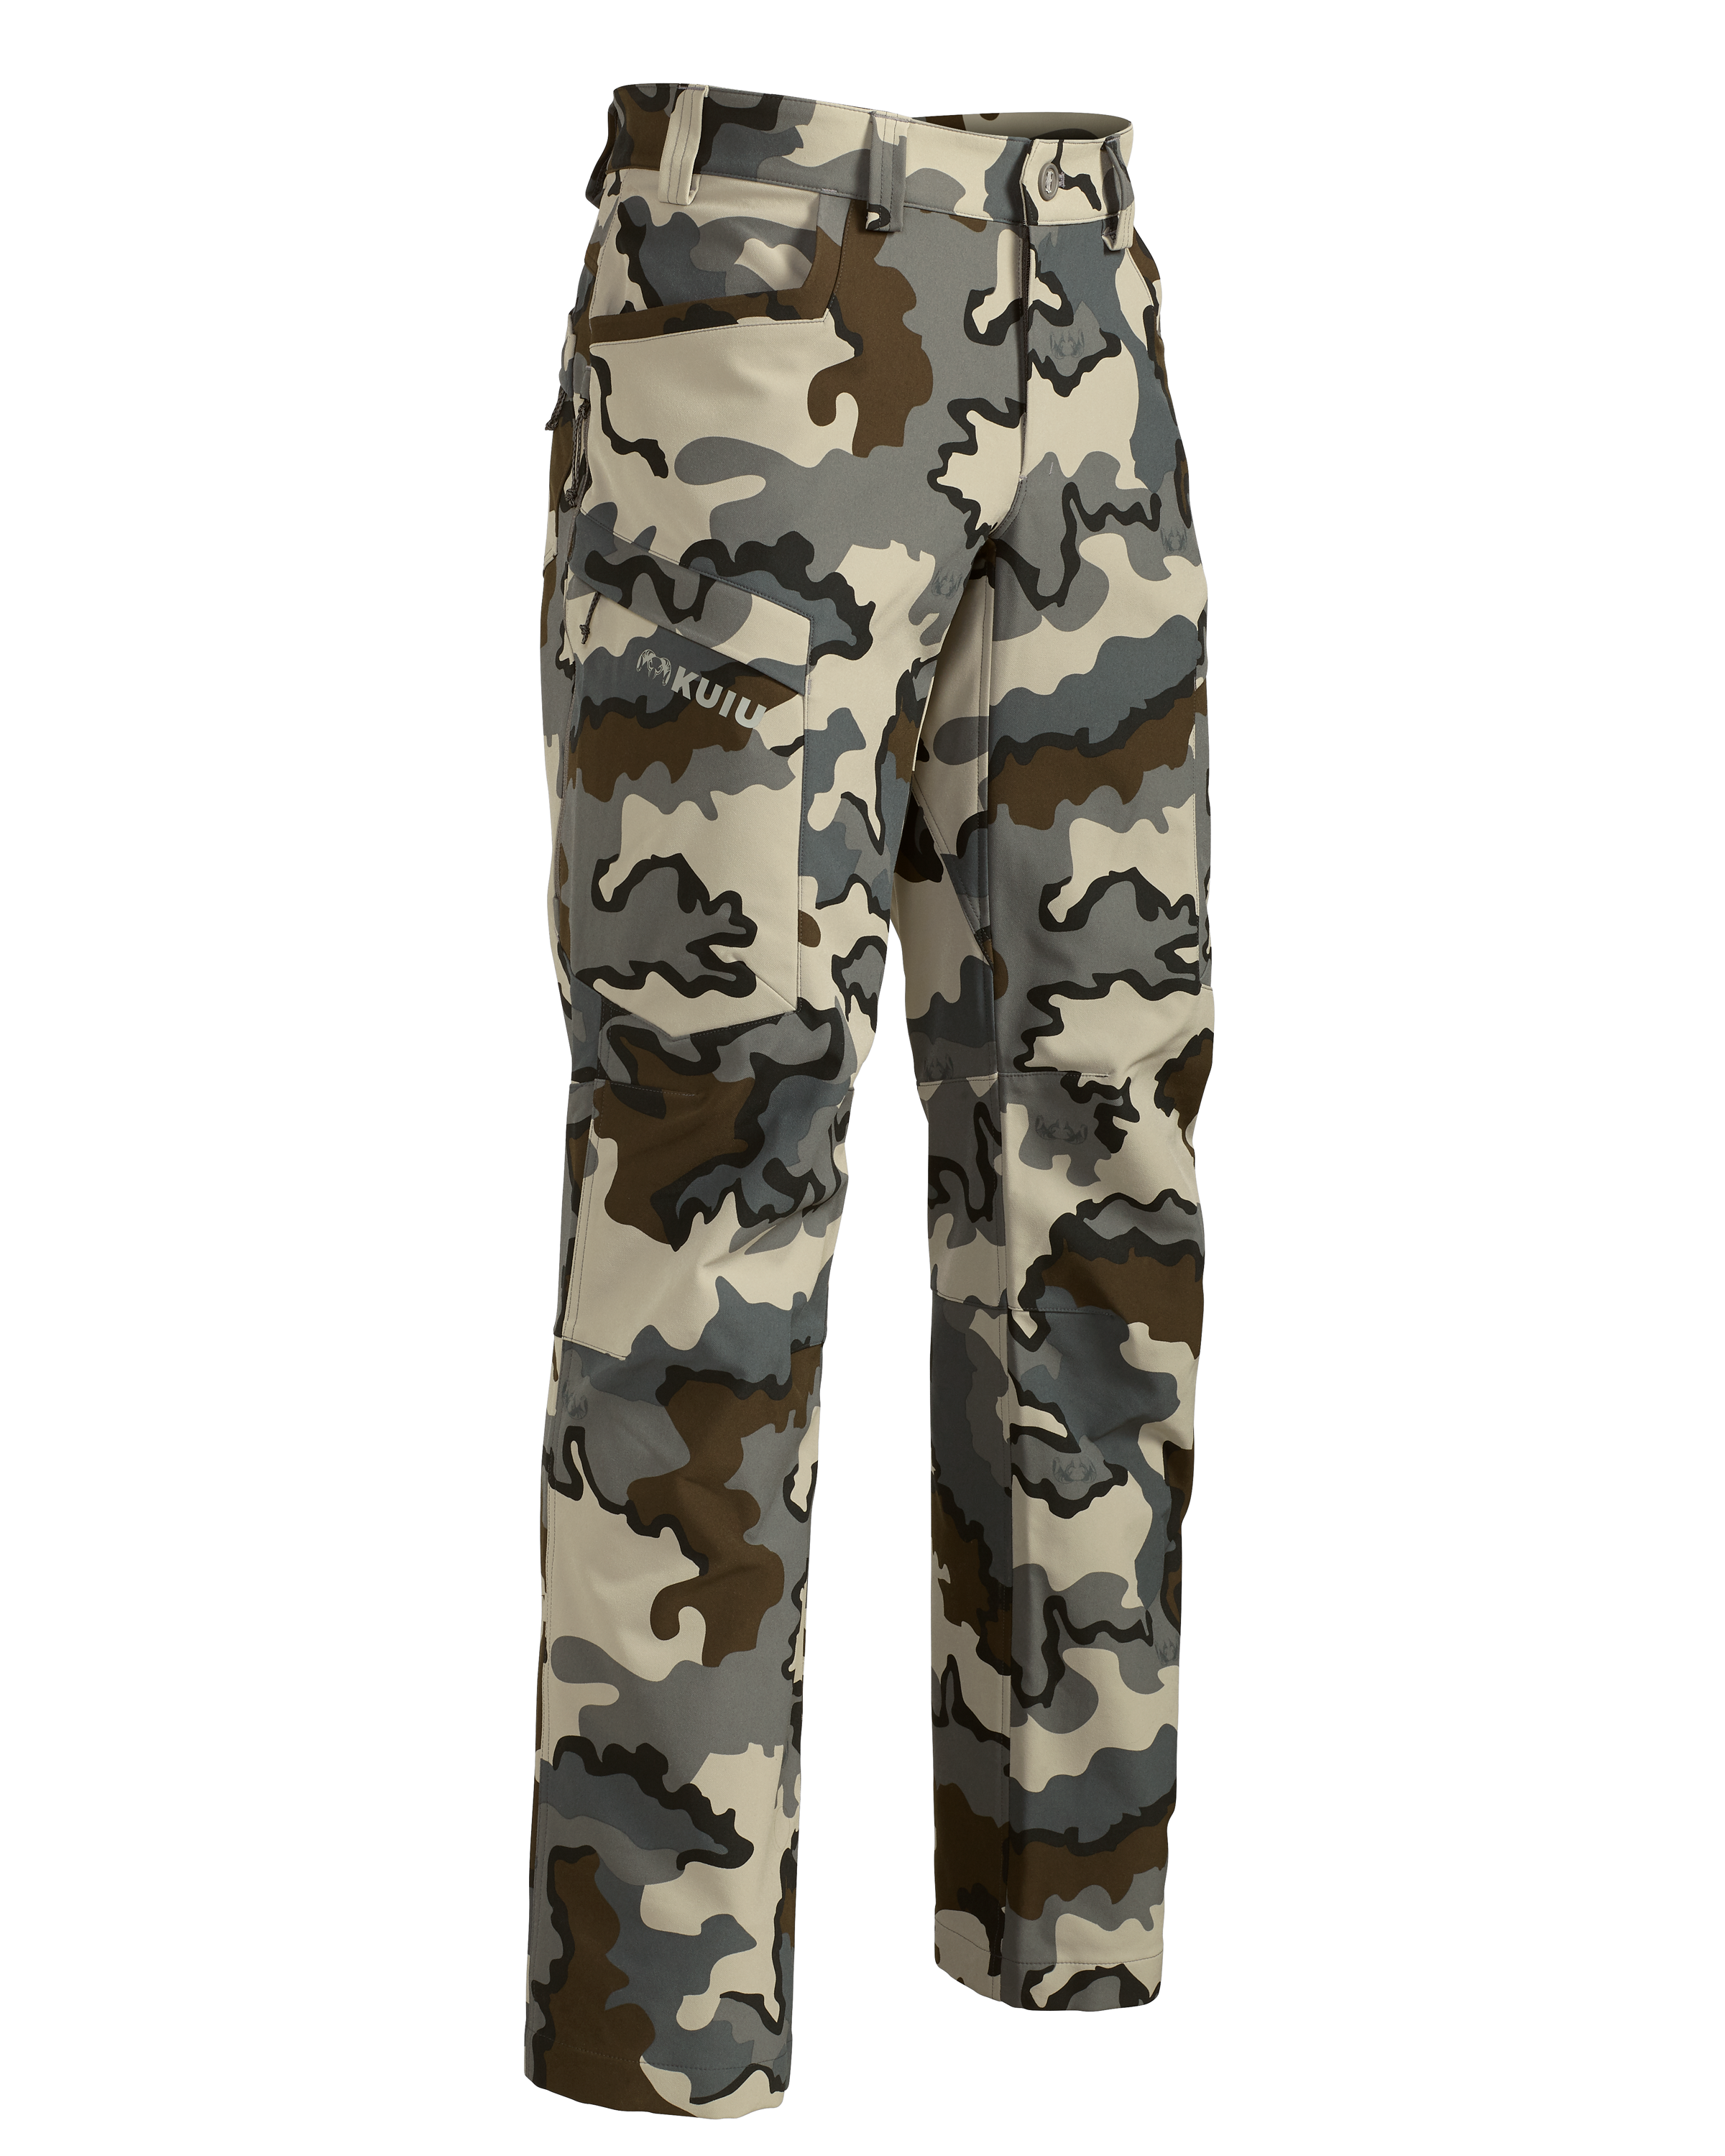 KUIU Attack Hunting Pant in Vias | Size 34